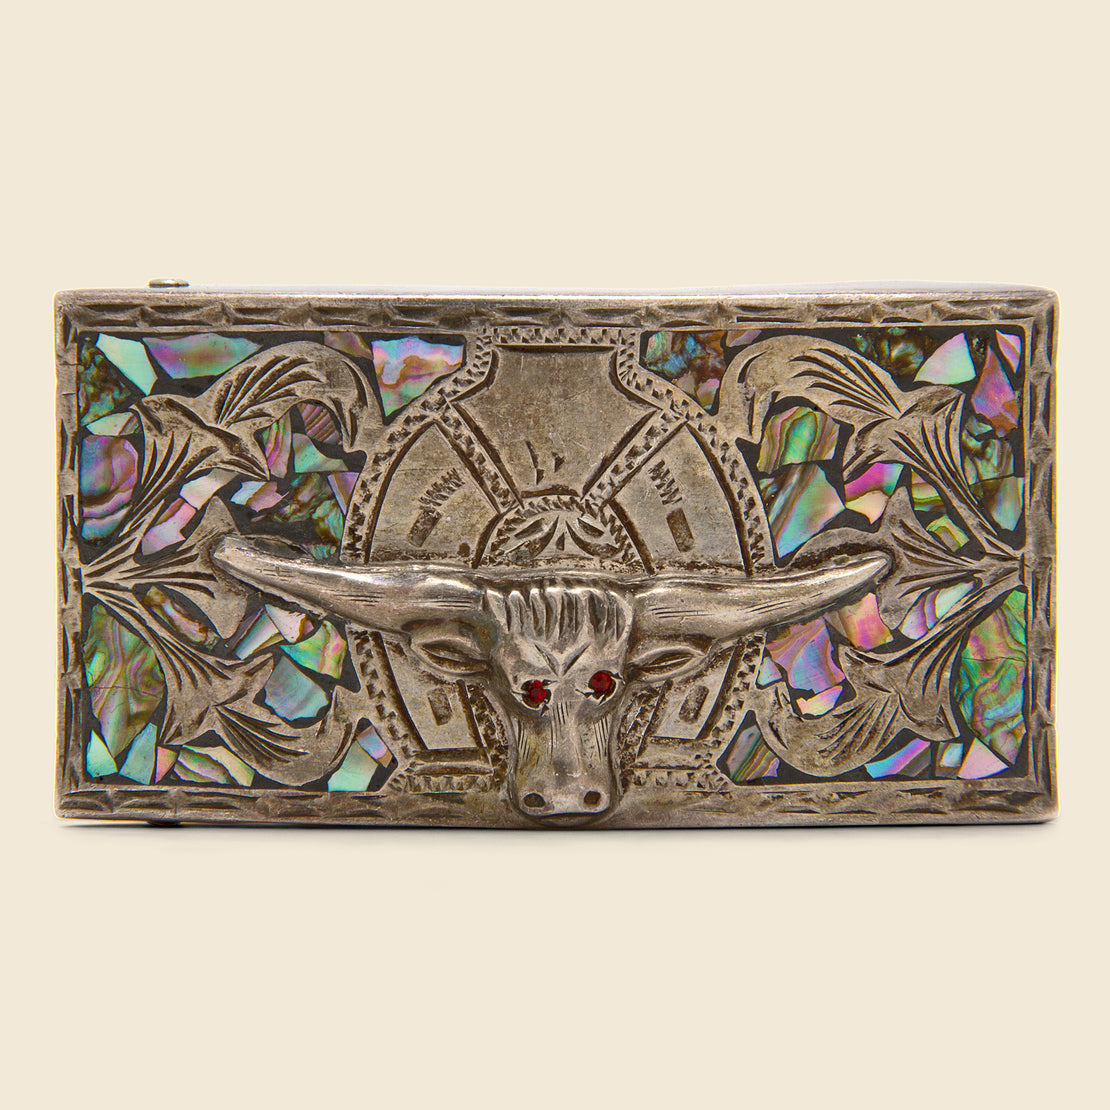 Vintage Longhorn Belt Buckle with Abalone Inlay - Silver